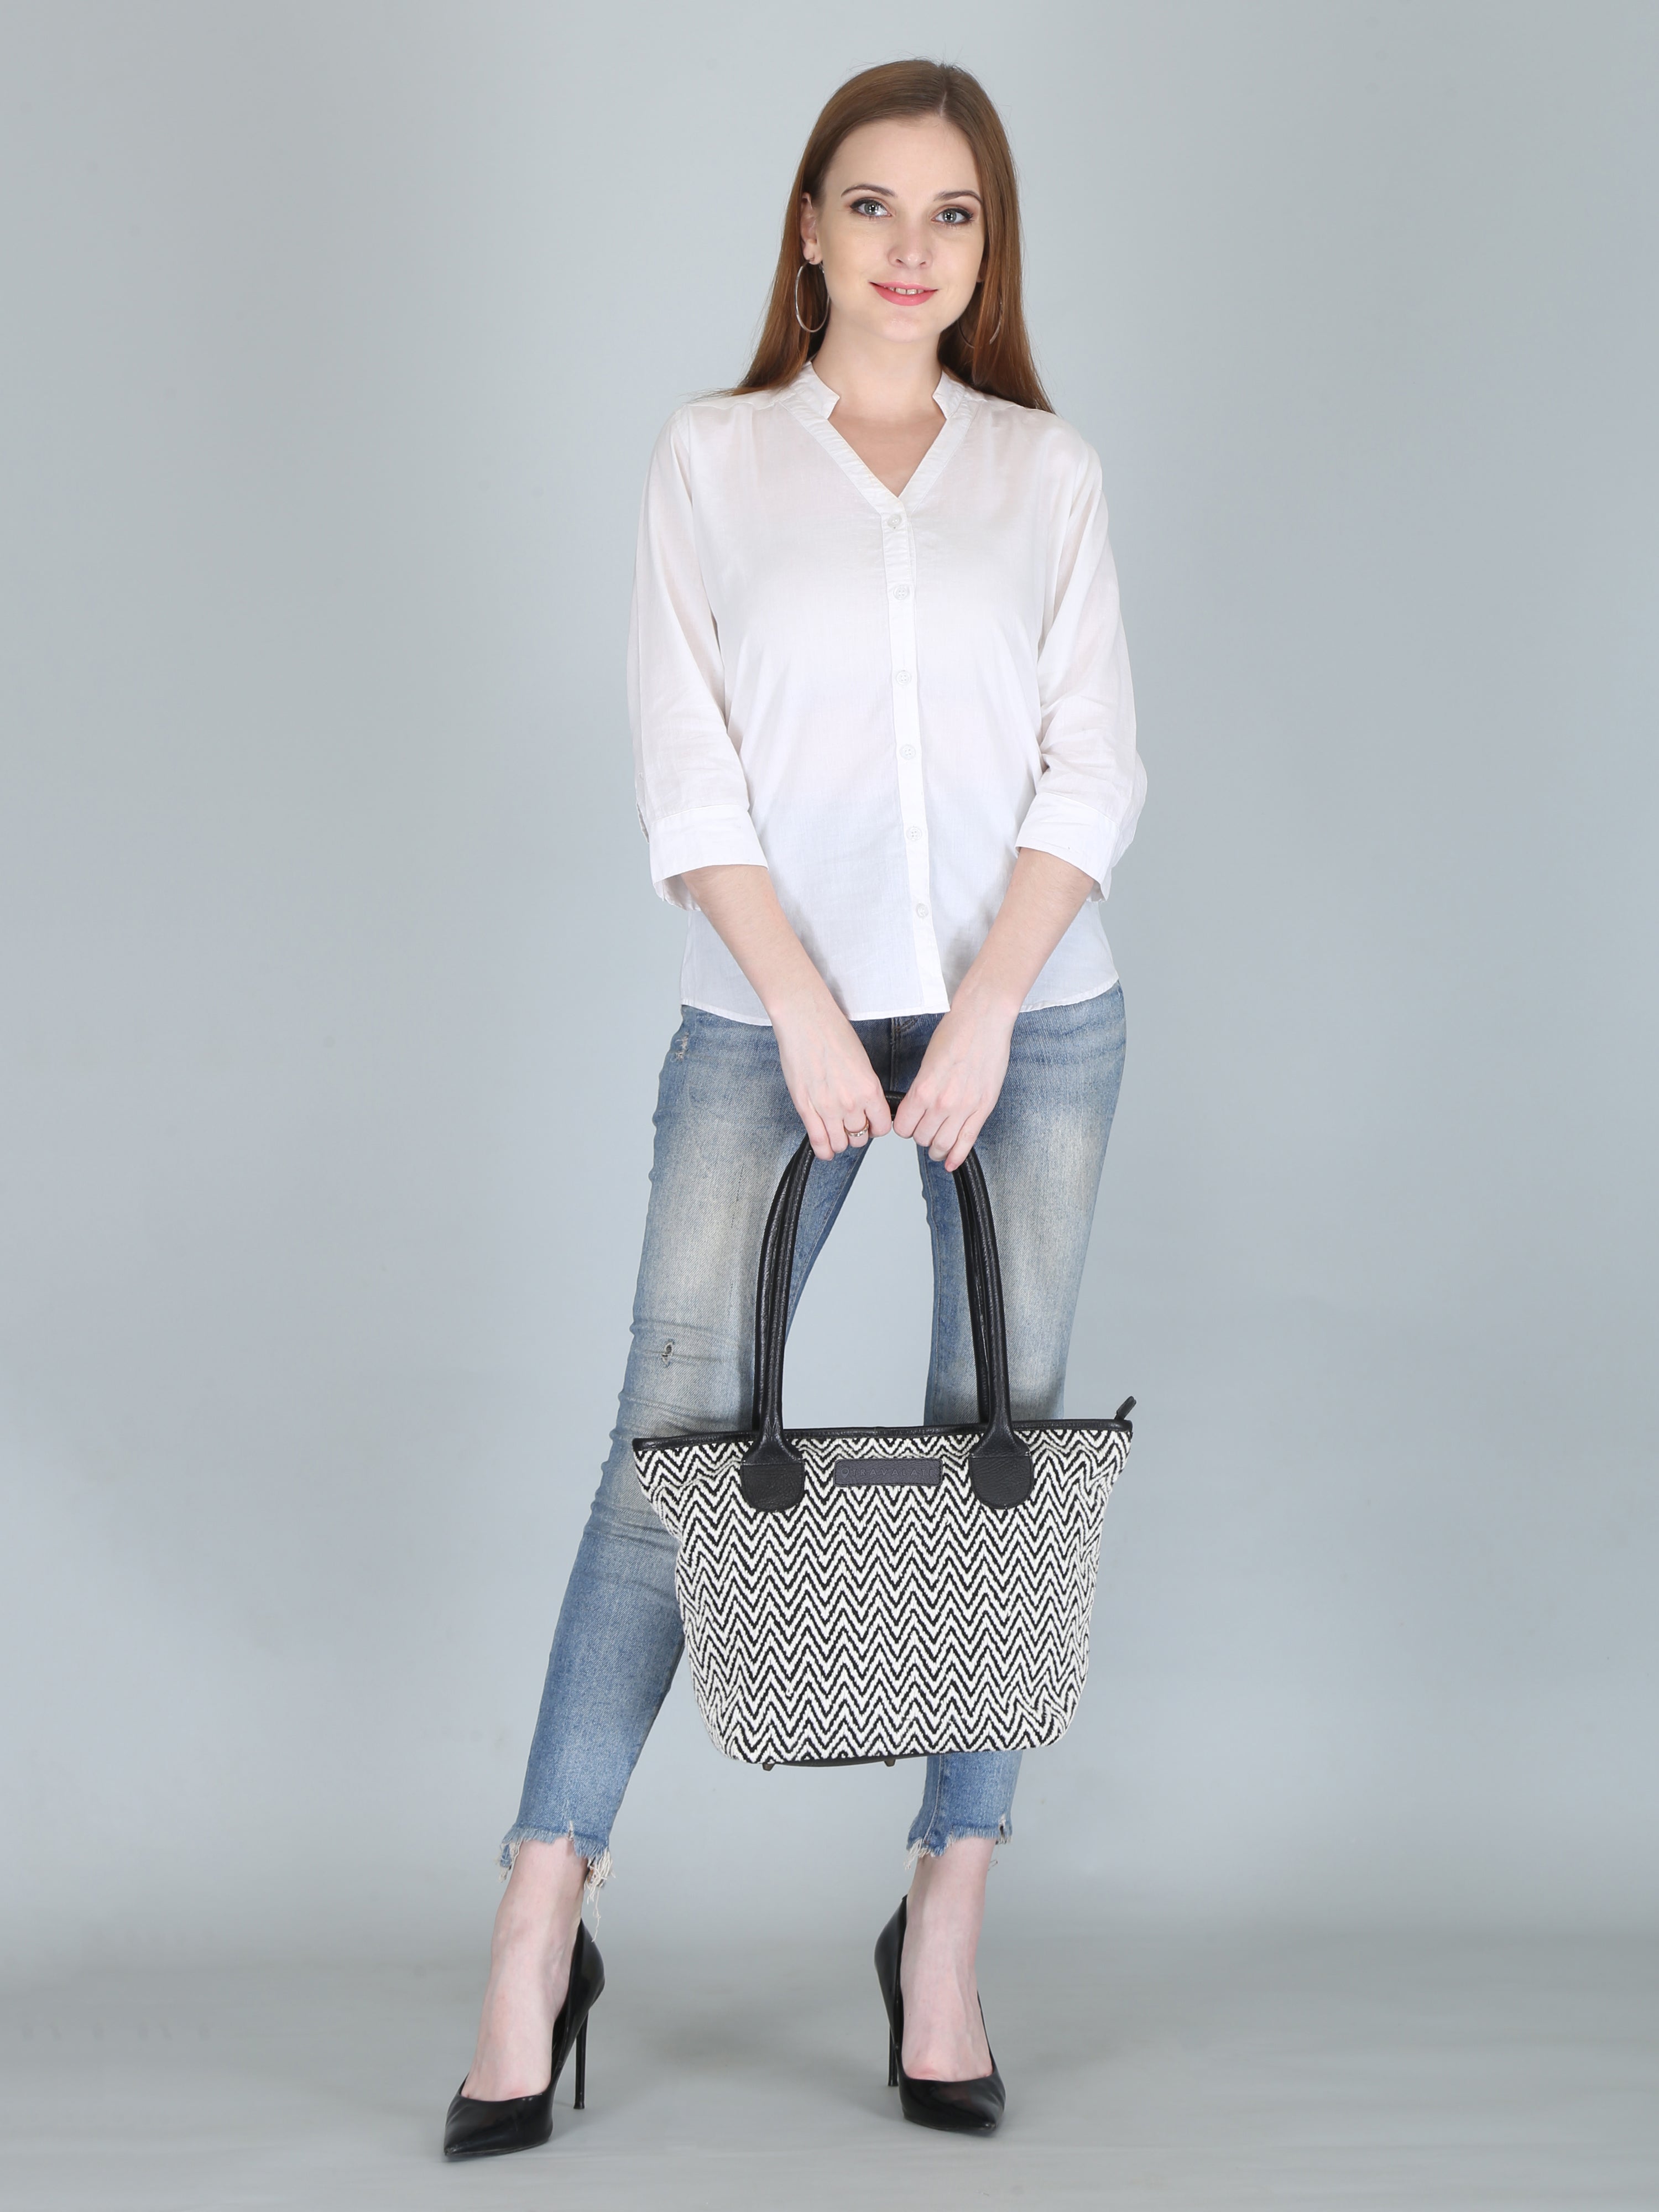 Woven Patterned Tote Bag | Black and White